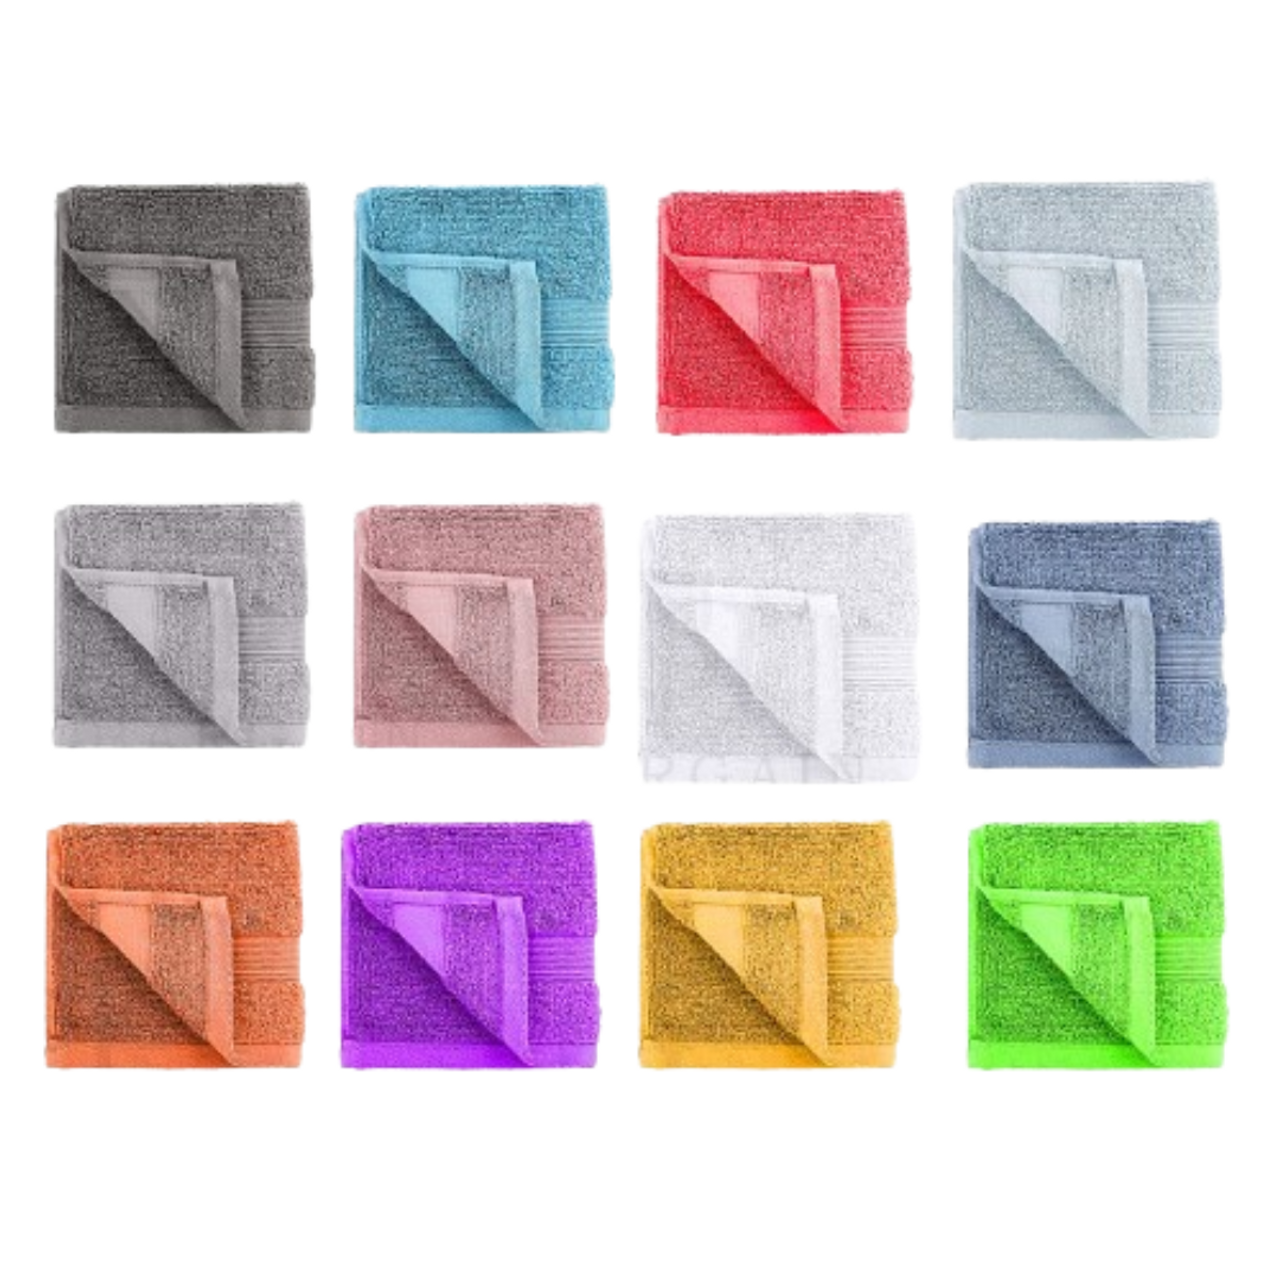 100% Cotton Absorbent Super Soft Washcloths (24-Pack) product image